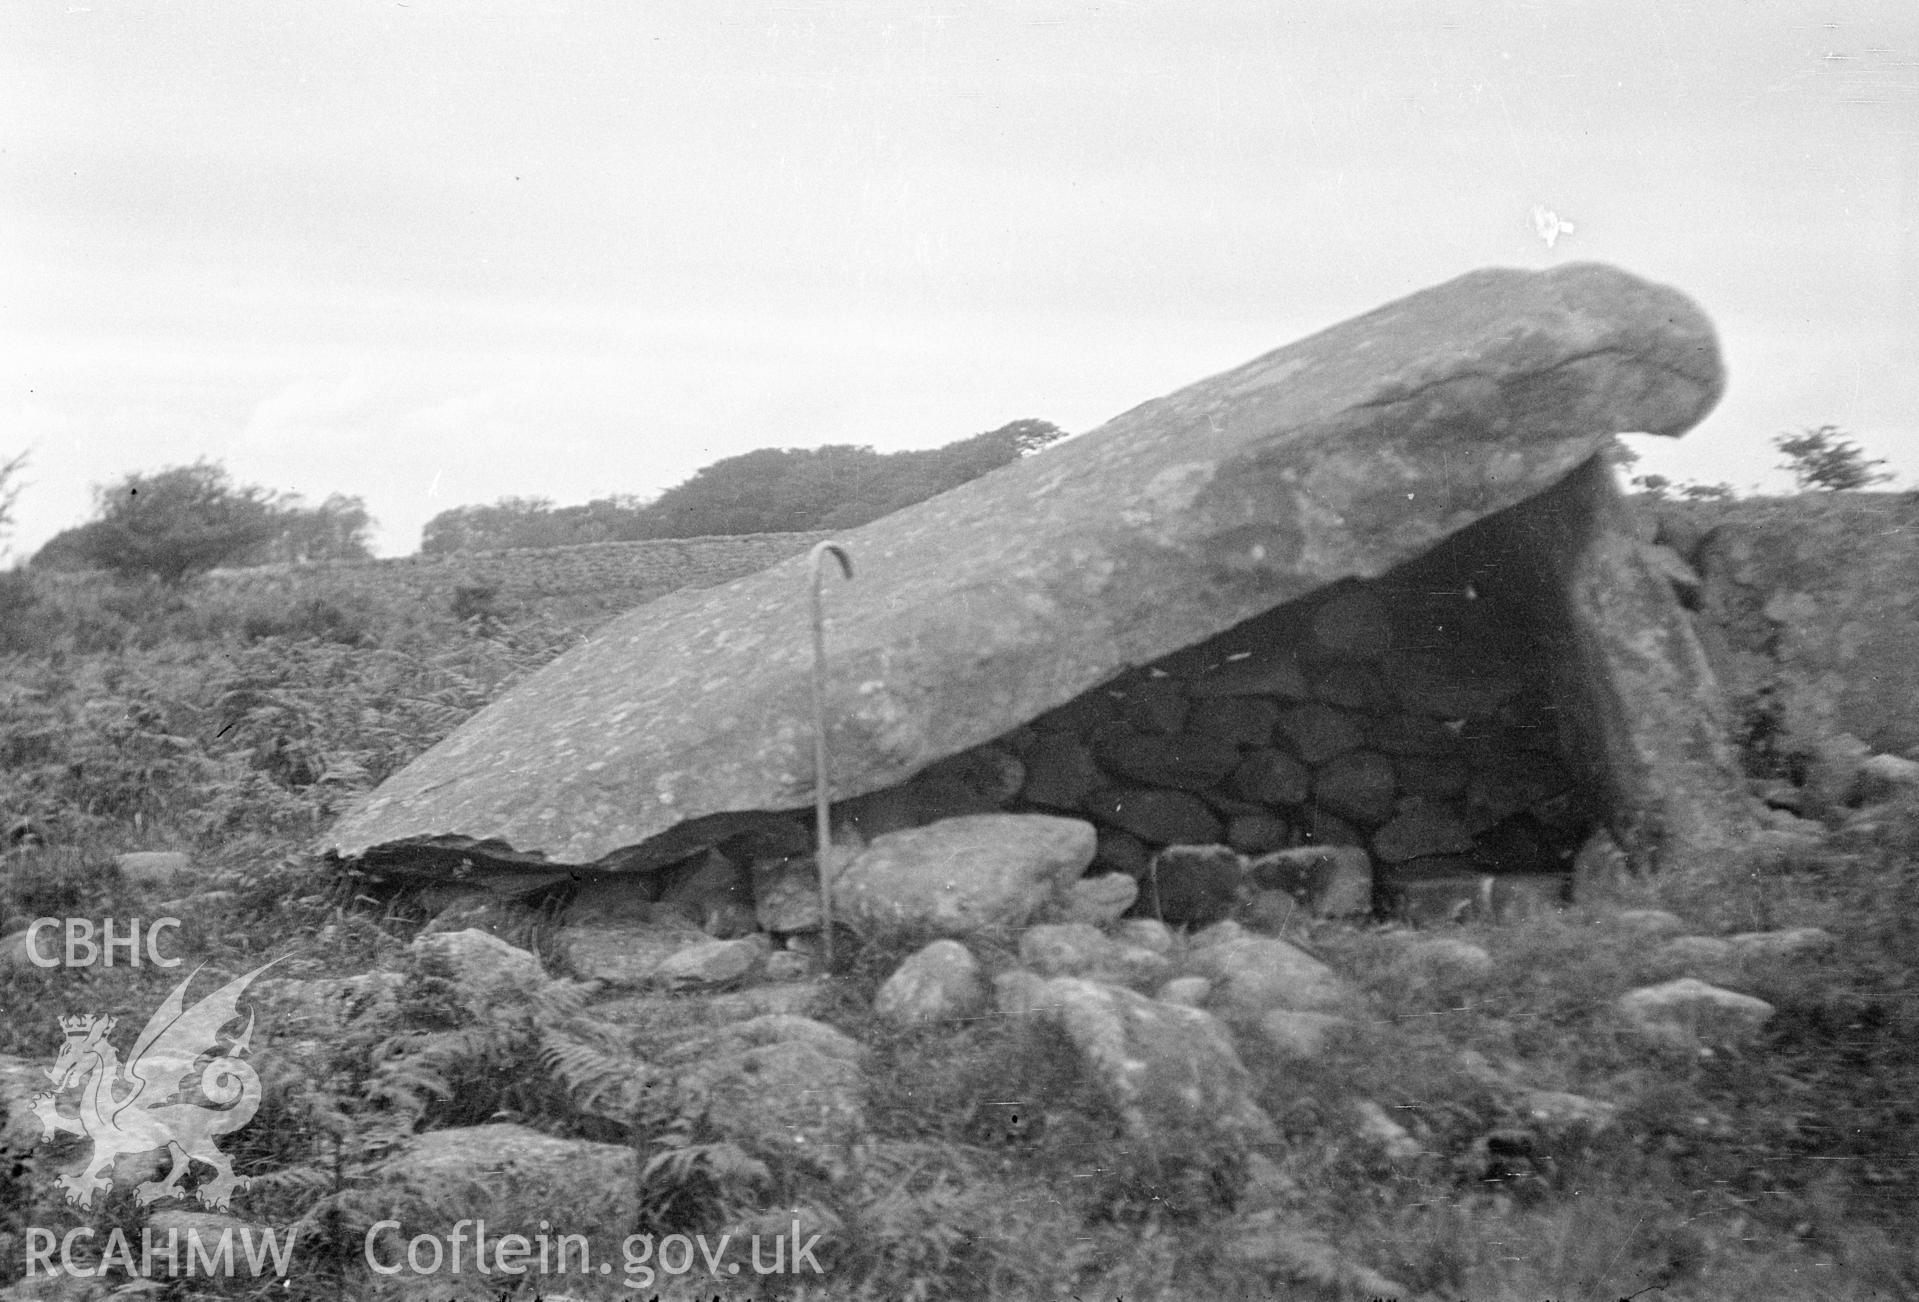 Digital copy of a nitrate negative showing Cors y Gedol Burial Chamber. From Cadw Monuments in Care Collection.